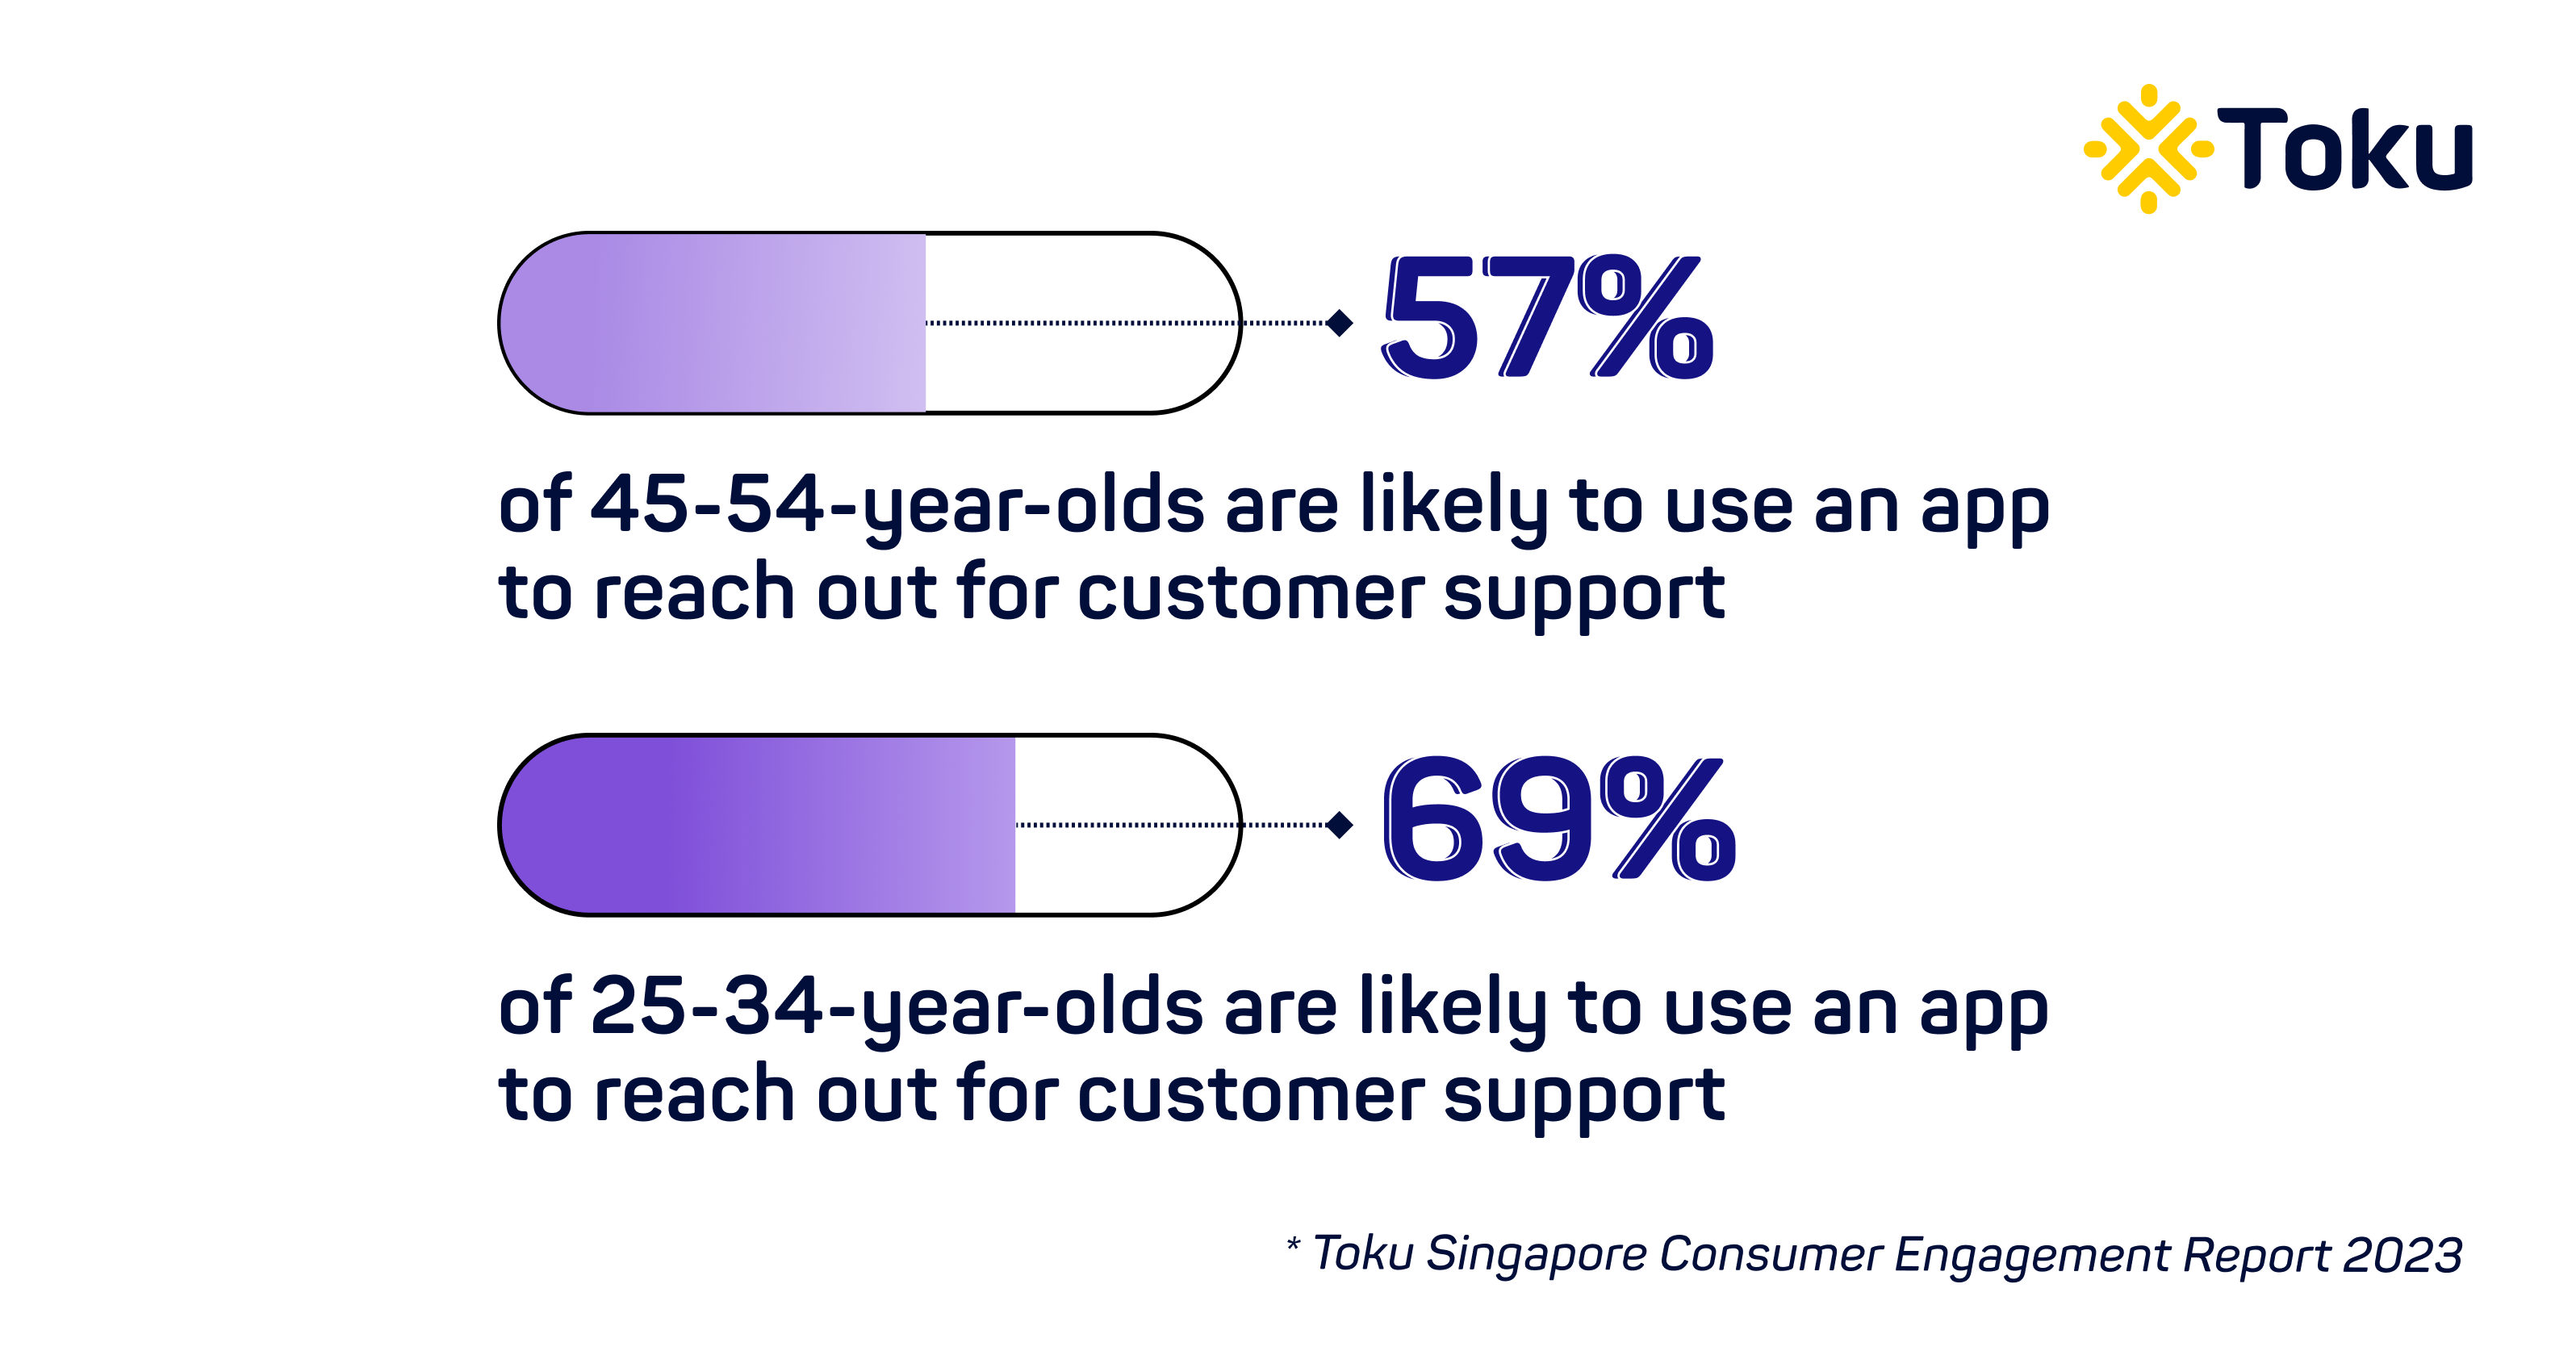 2023 likelihood of different consumer age groups reaching out for customer support using an app